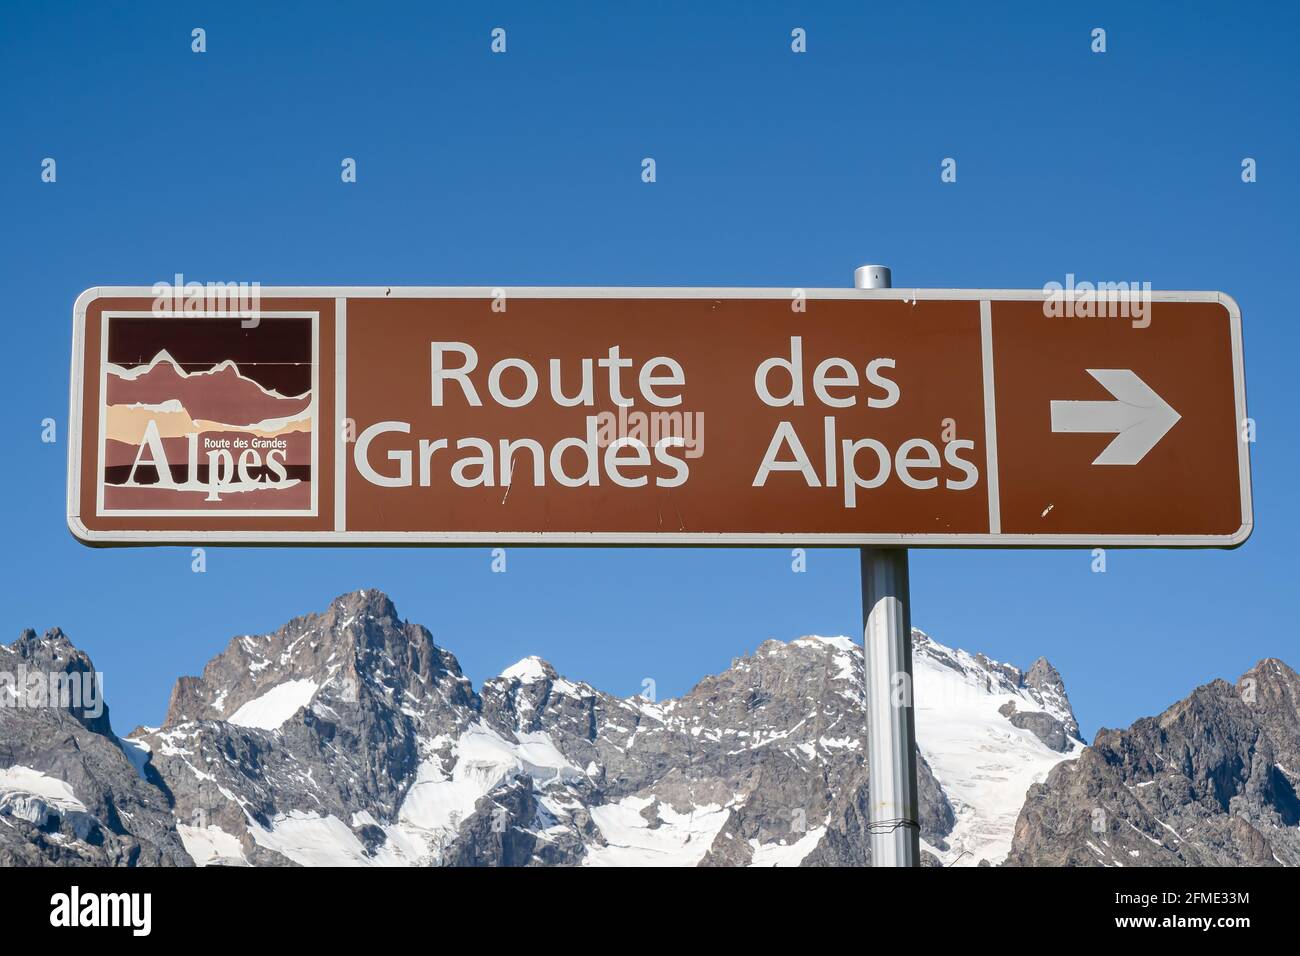 Col du Lautaret, France - July 8, 2020: A sign showing the direction of the road of Alps. Stock Photo